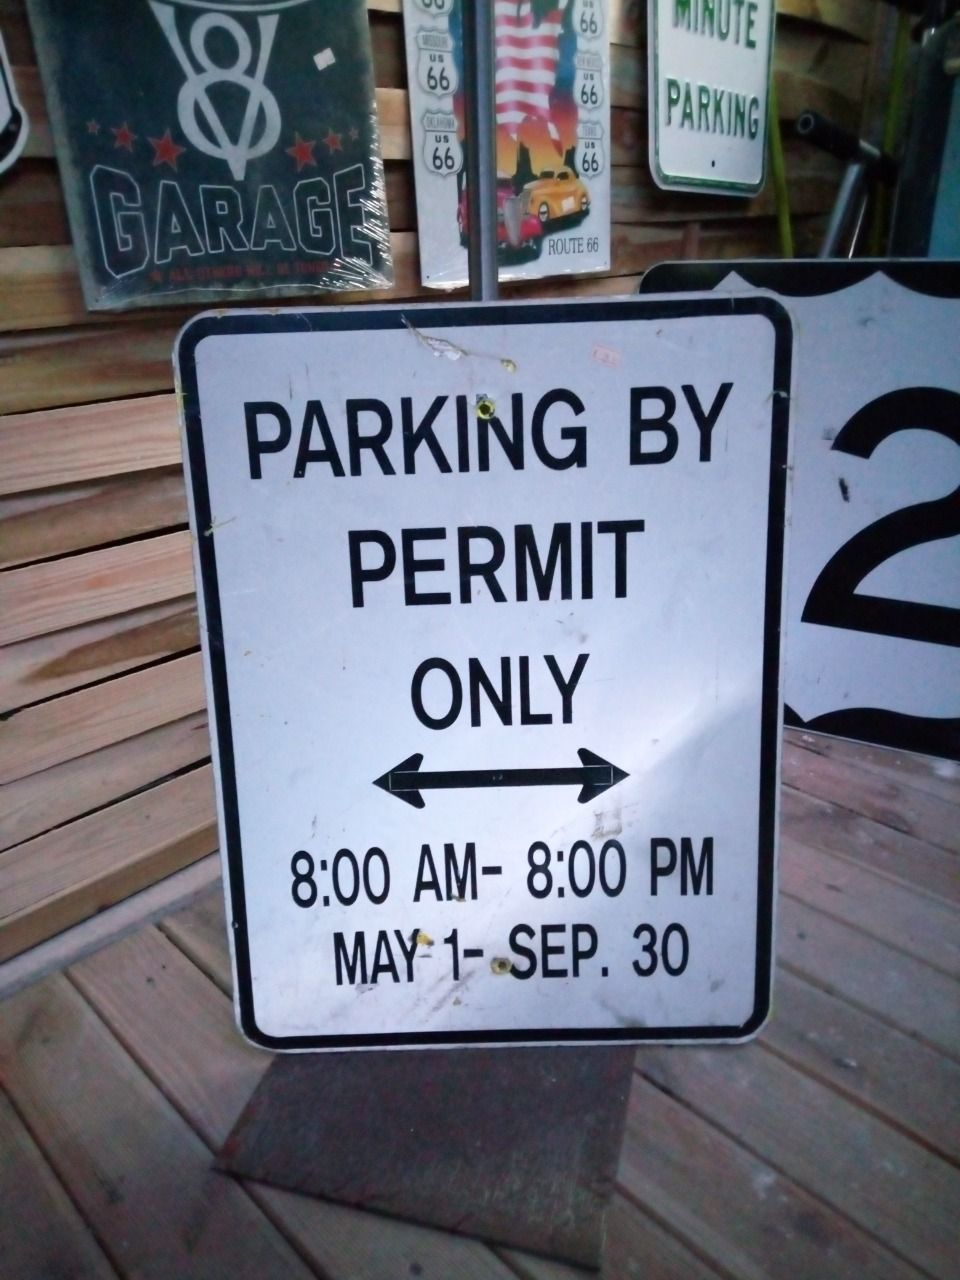 Panneau routier US "Parking by permit only"